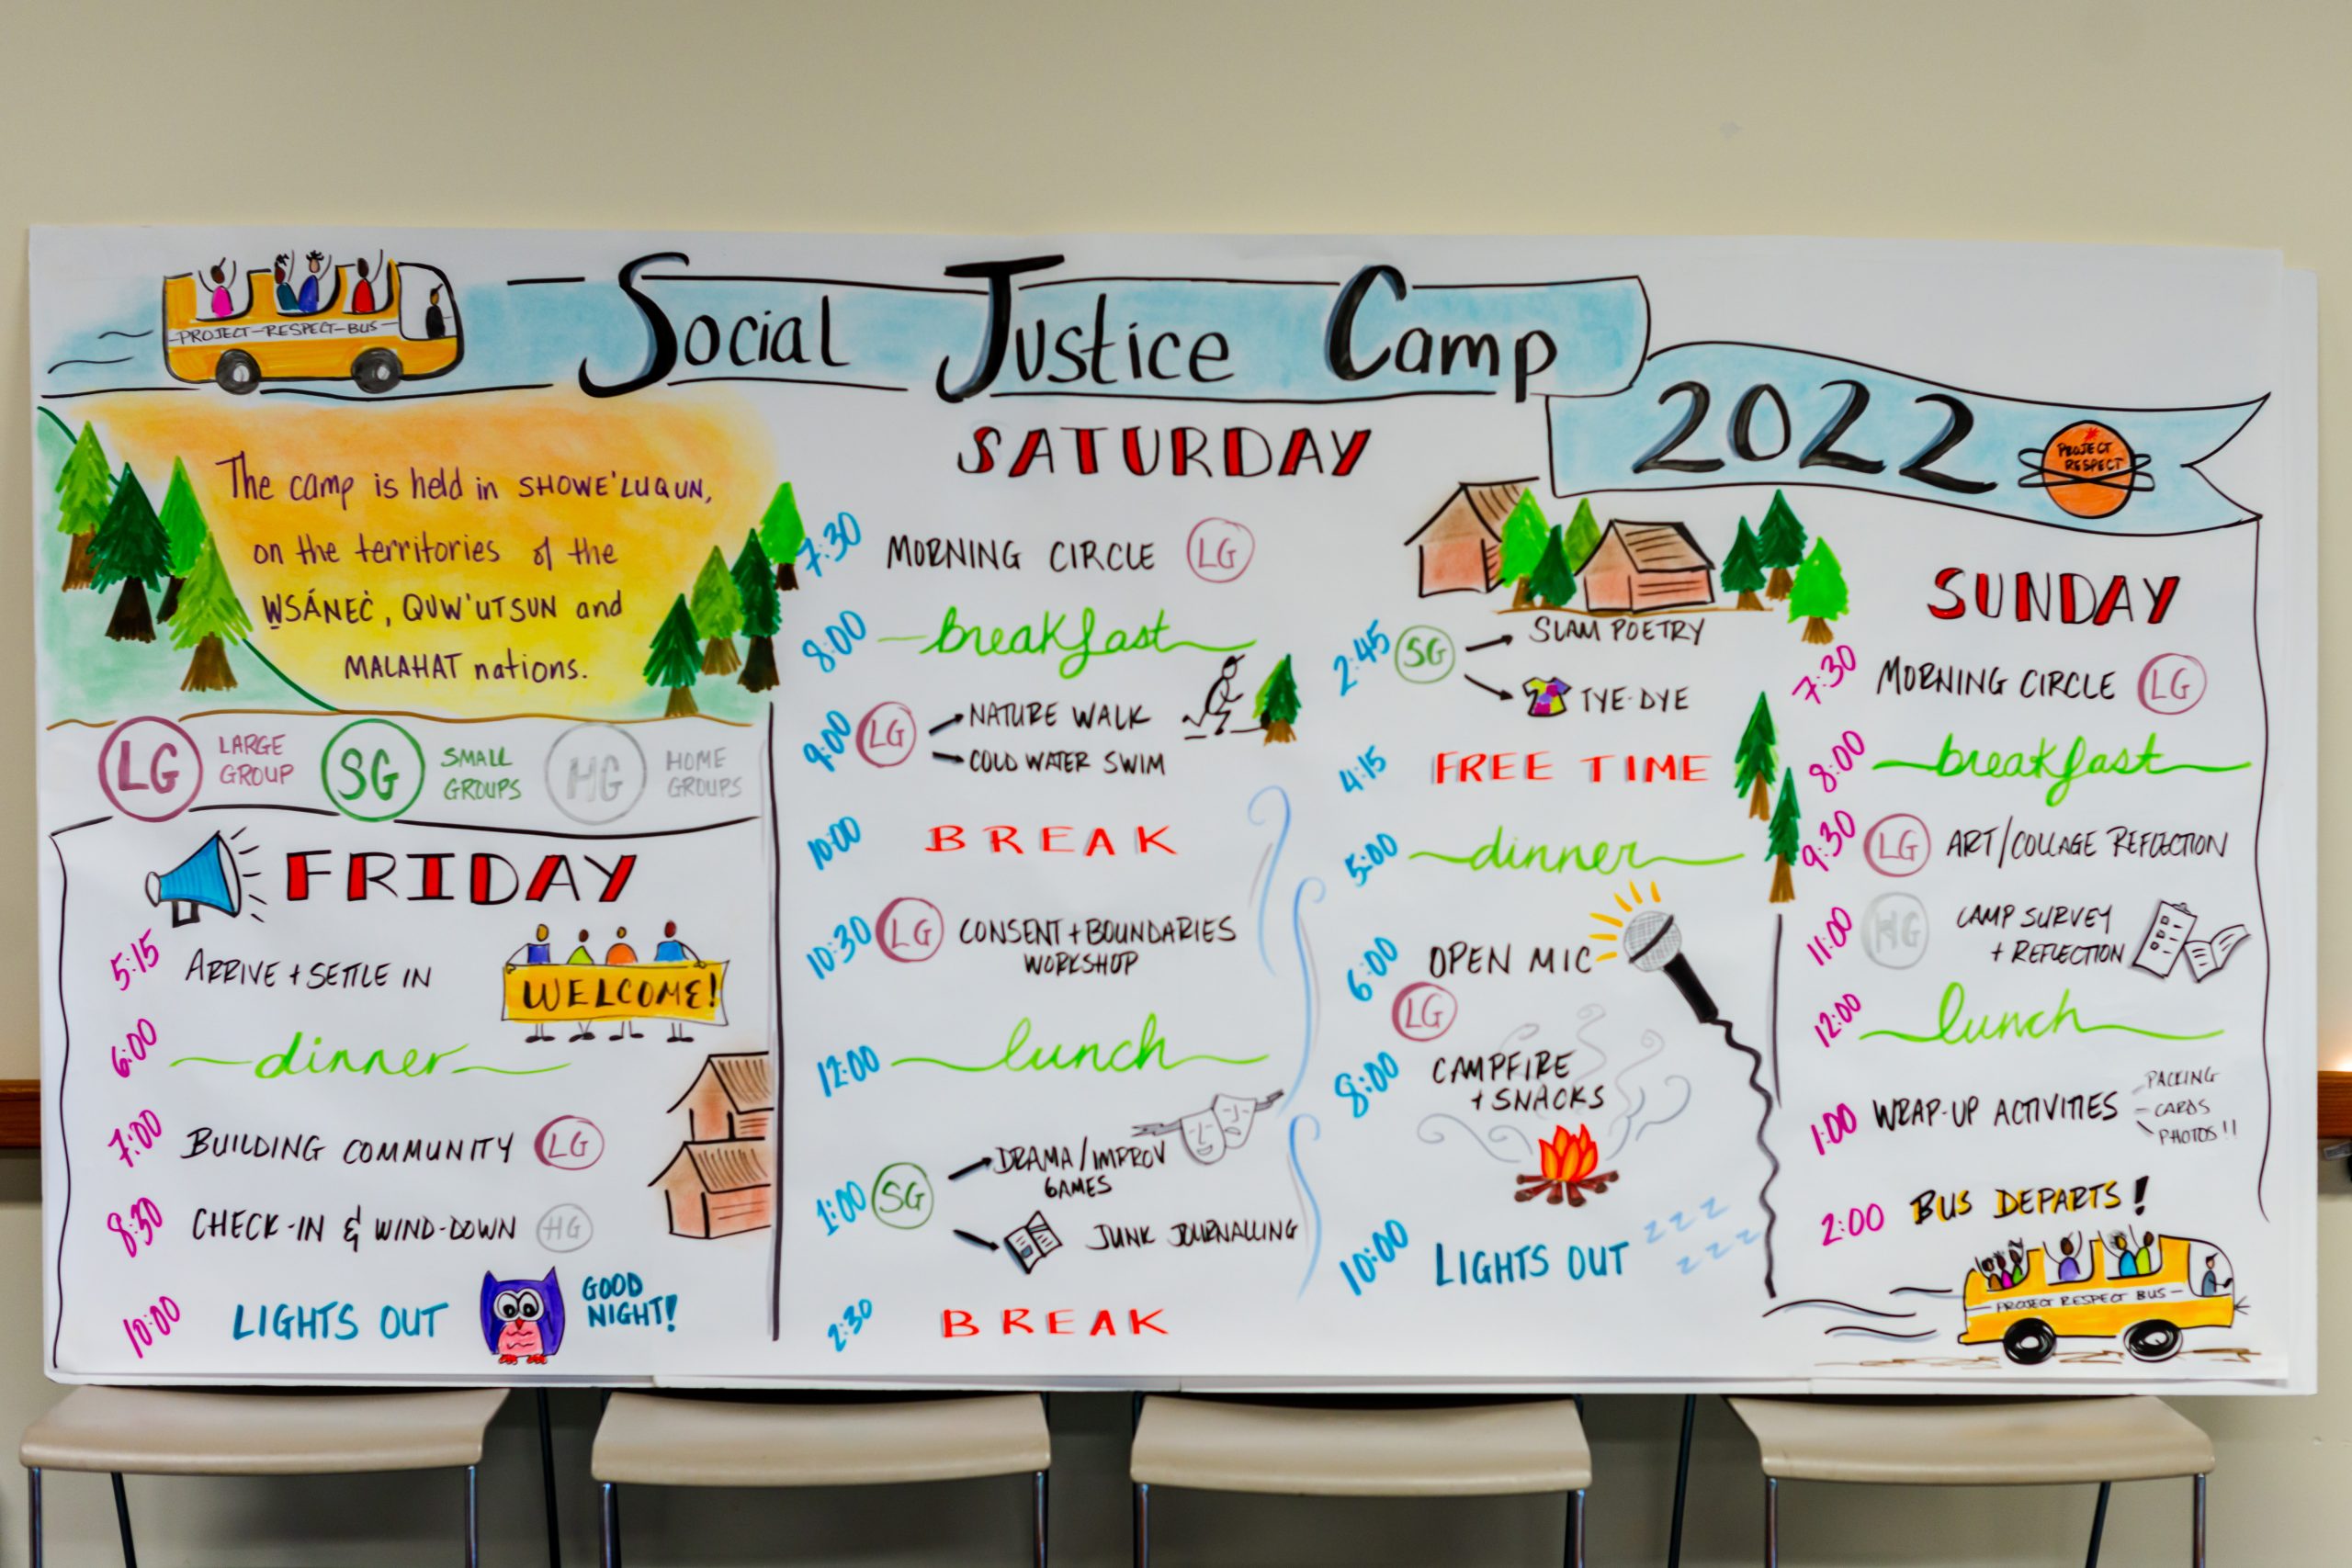 The agenda for the weekend, on a large piece of paper propped up on four chairs. The paper is white with colorful illustrations and text overviewing the events and activities over Friday, Saturday, and Sunday.